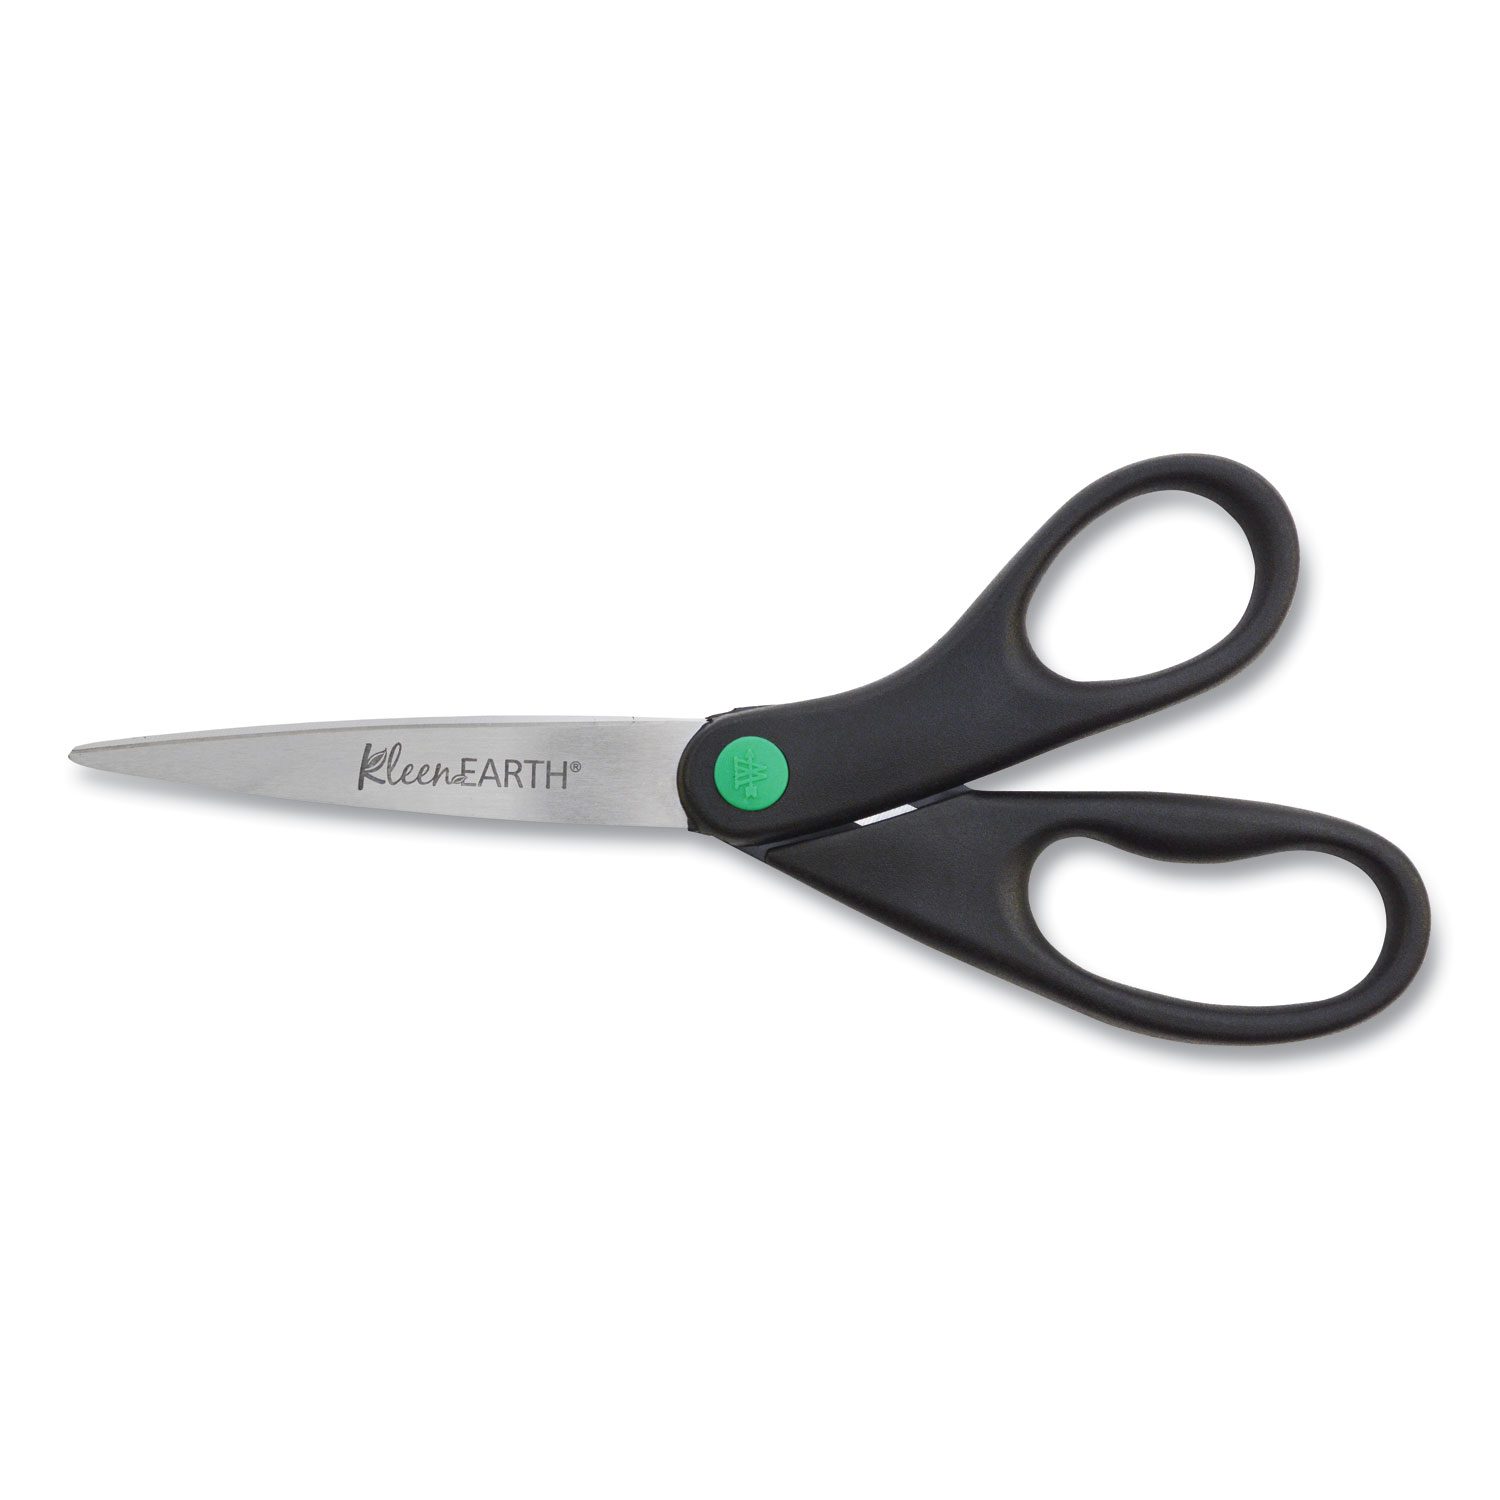 Westcott All-Purpose Value Stainless Steel Scissors, 8, Pointed, Black,  Pack Of 3